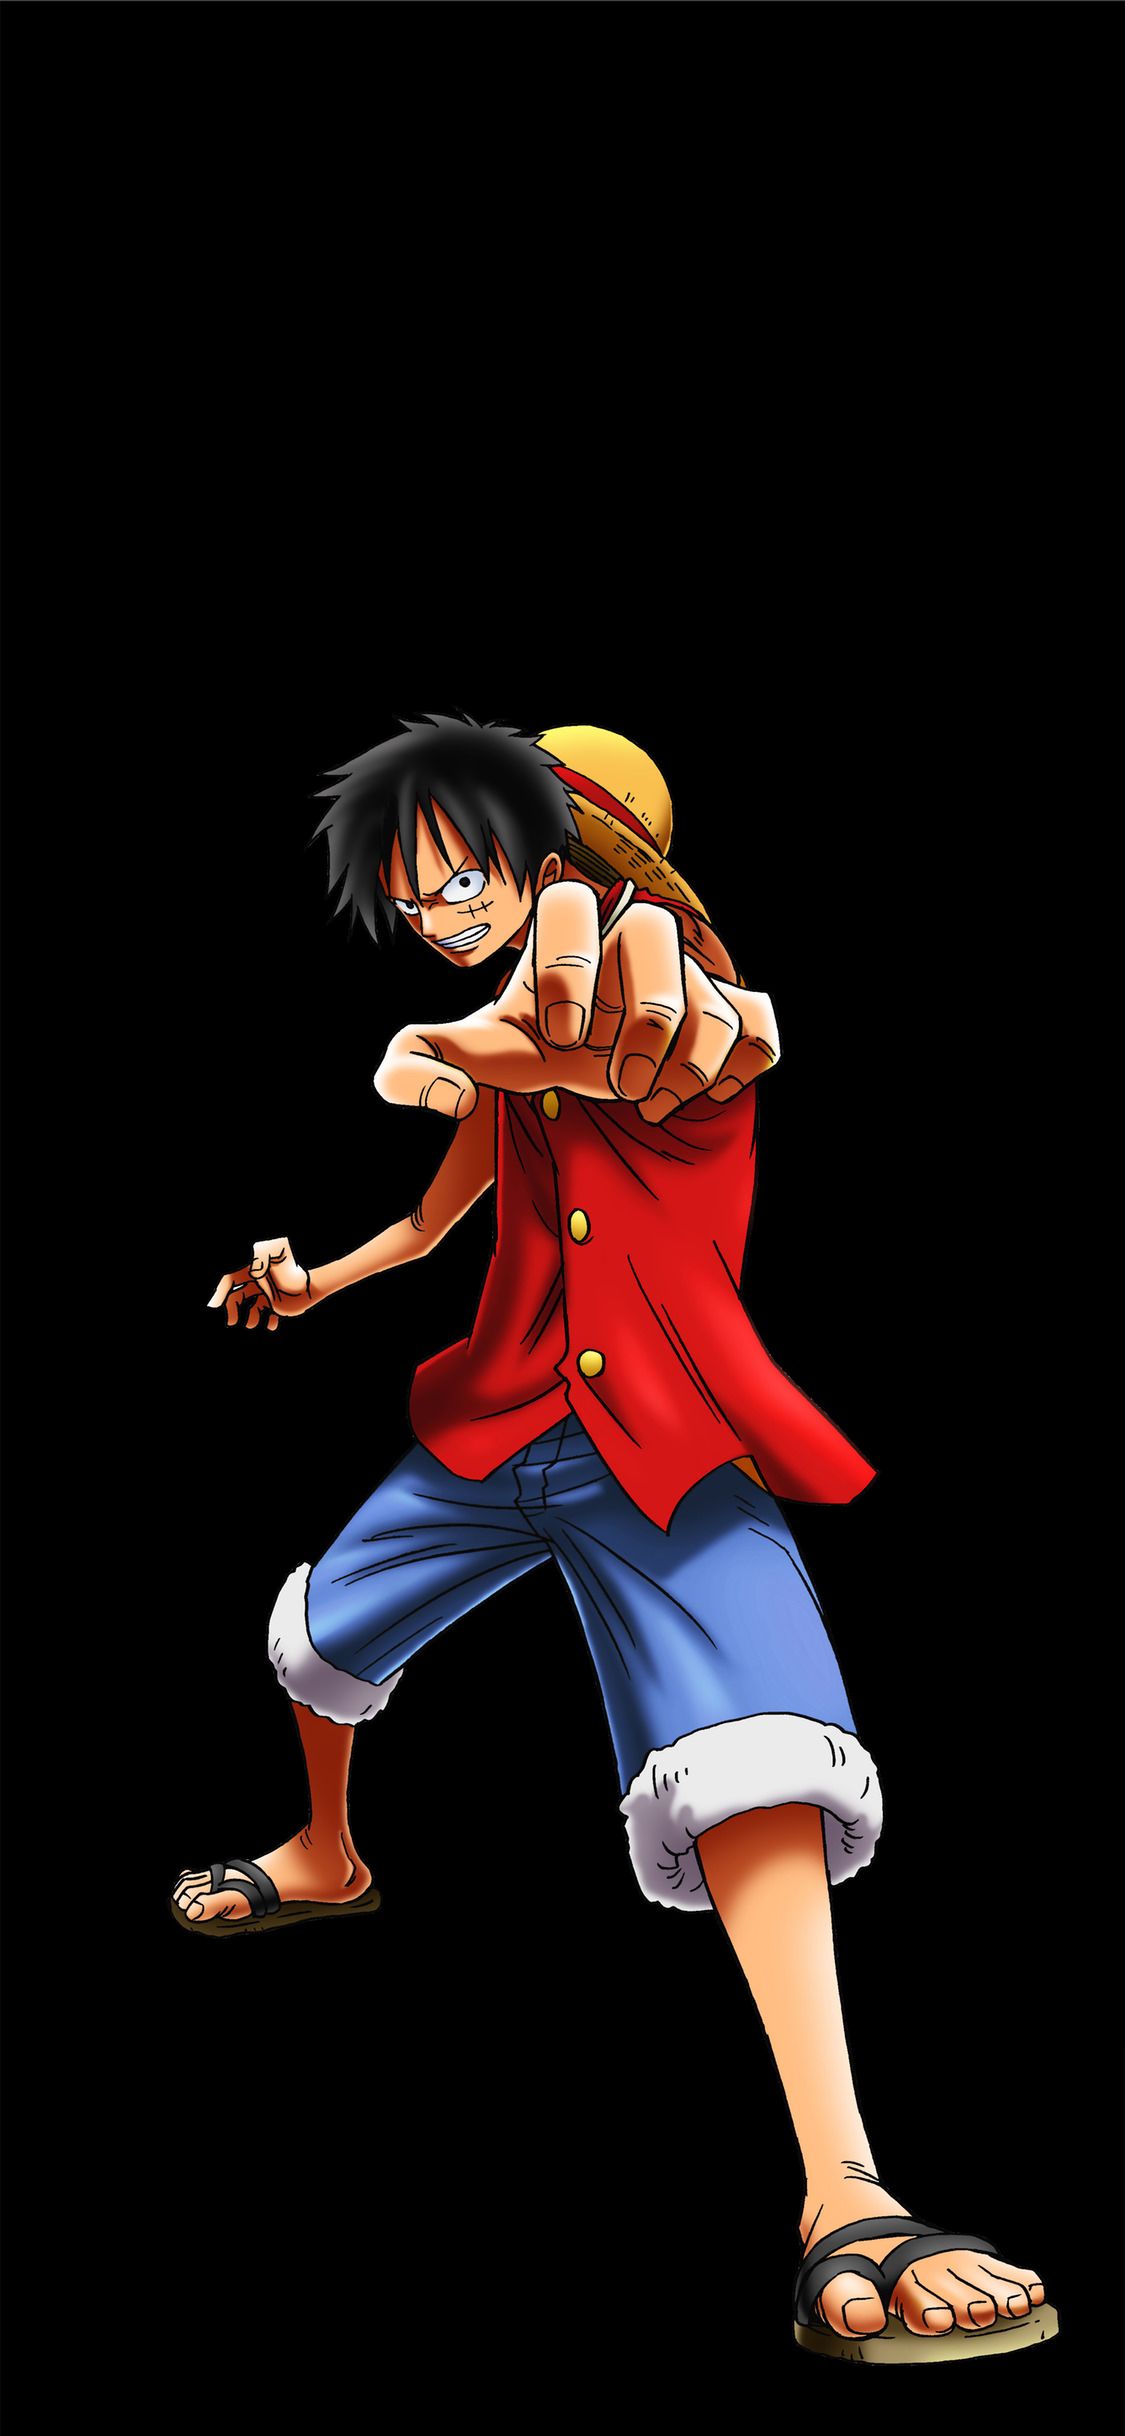 Monkey D. Luffy [1125x2436] (i.imgur.com) Submitted By DoctorPepeX To R Amoledbackground 0 Comments Ori. Manga Anime One Piece, Monkey D Luffy, One Piece Movies